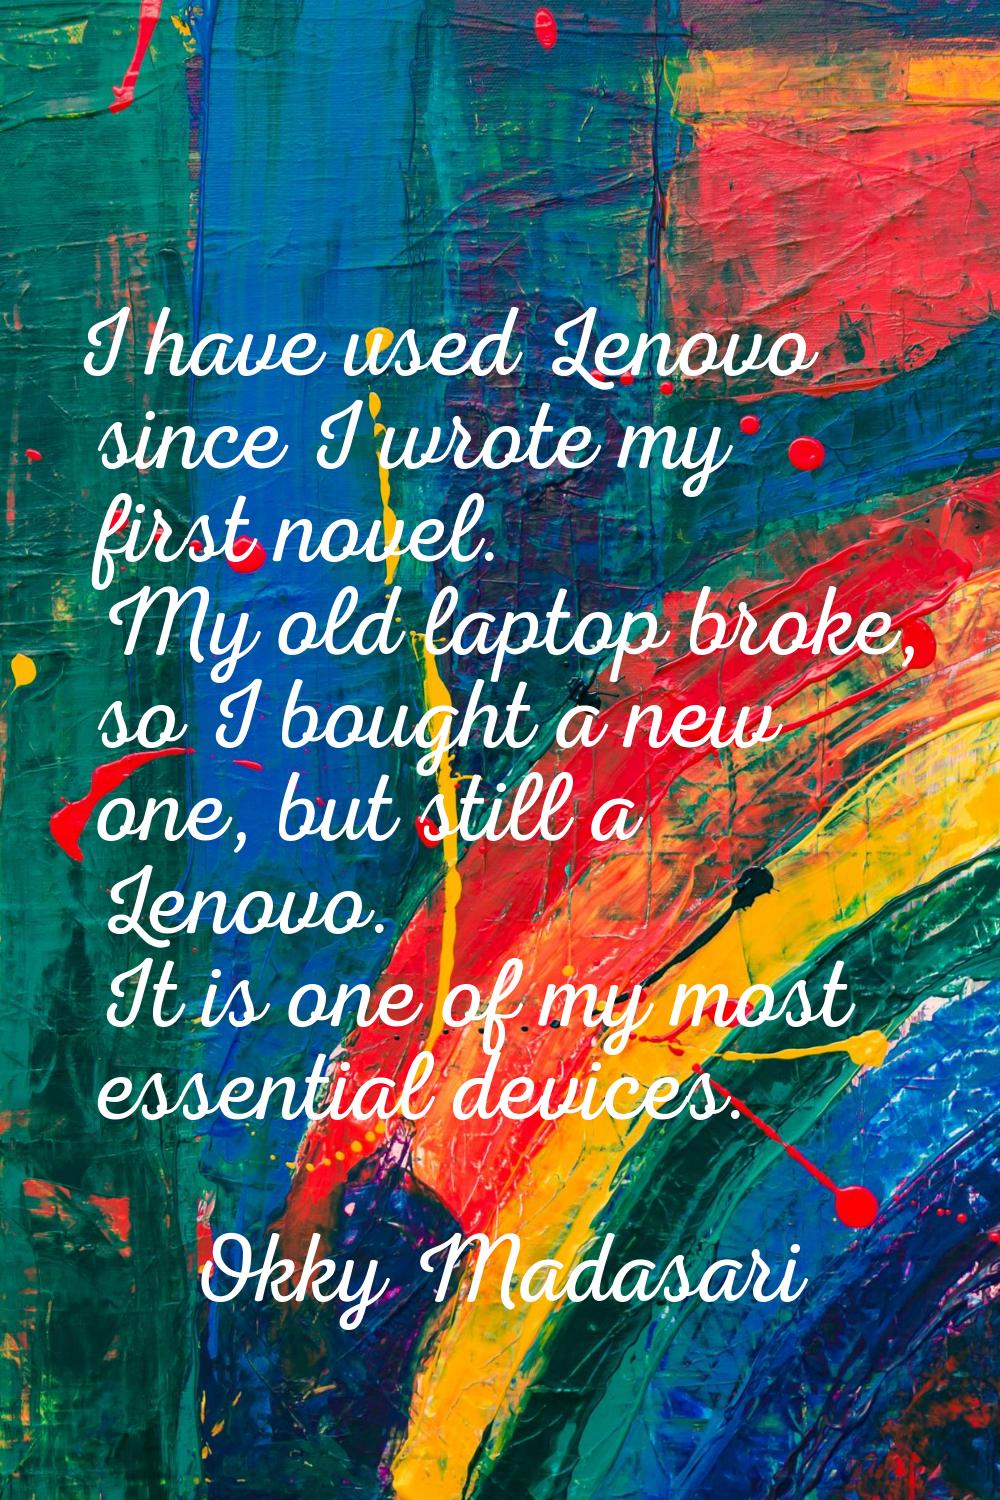 I have used Lenovo since I wrote my first novel. My old laptop broke, so I bought a new one, but st